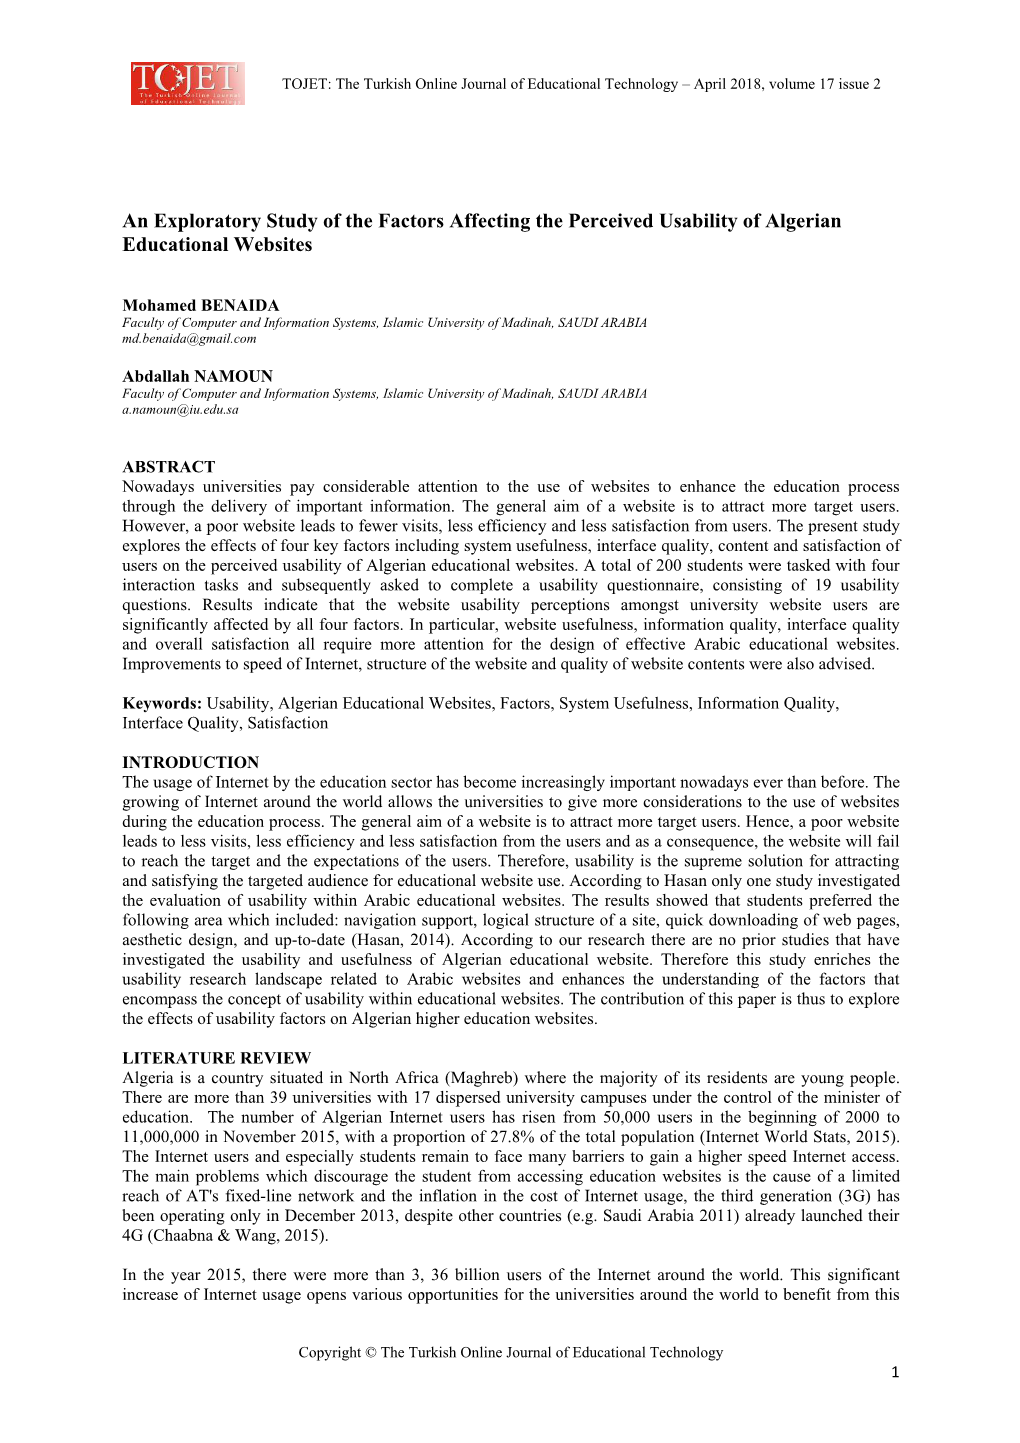 An Exploratory Study of the Factors Affecting the Perceived Usability of Algerian Educational Websites